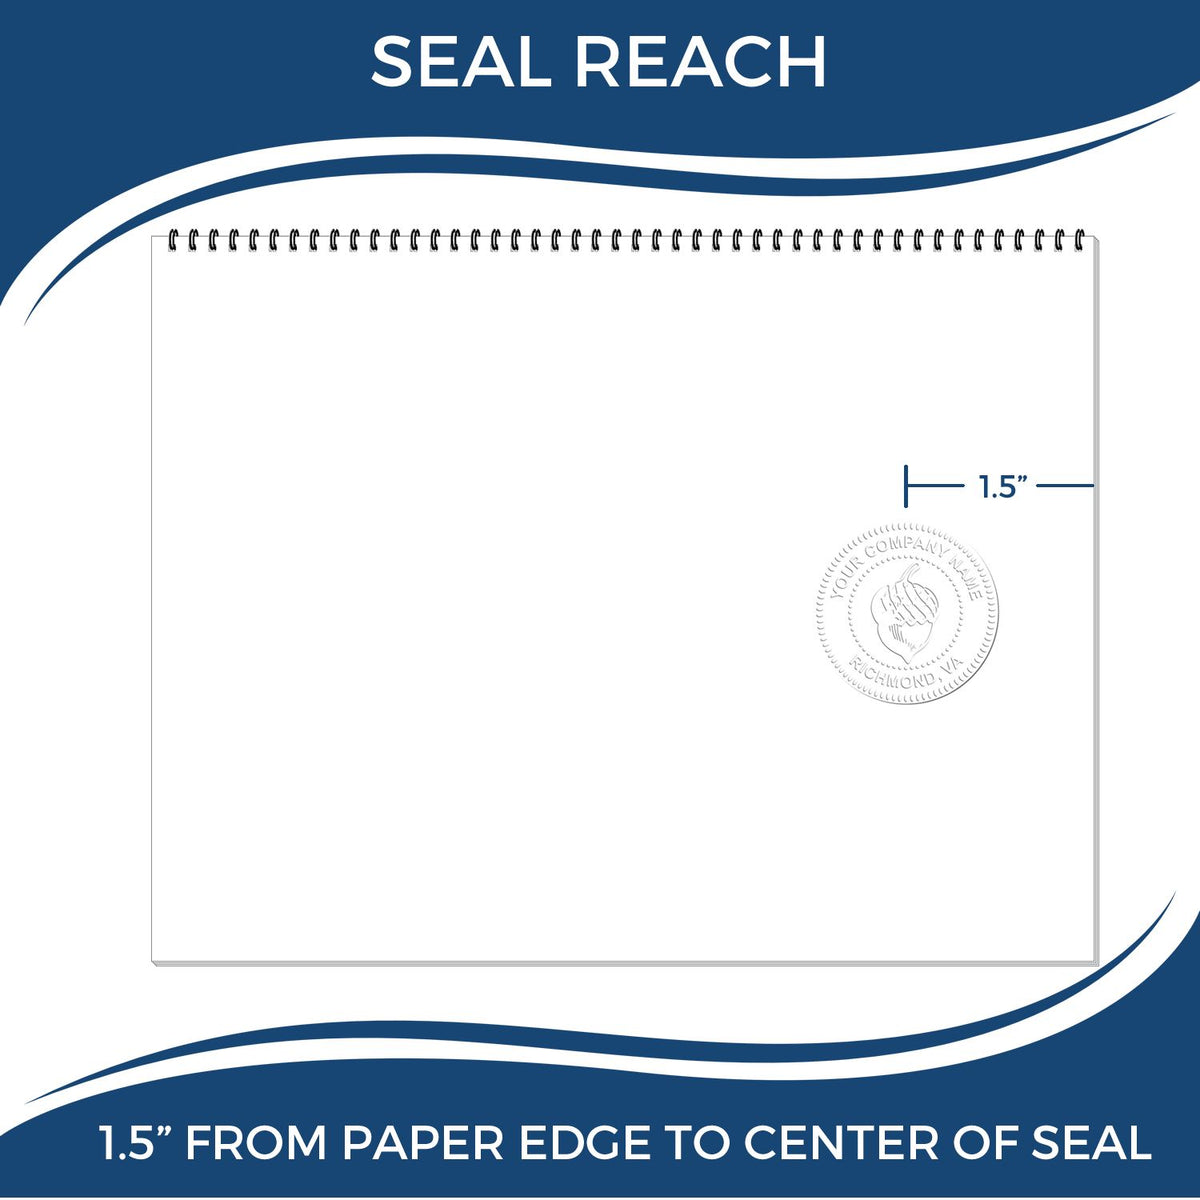 An infographic showing the seal reach which is represented by a ruler and a miniature seal image of the Gift Nevada Landscape Architect Seal